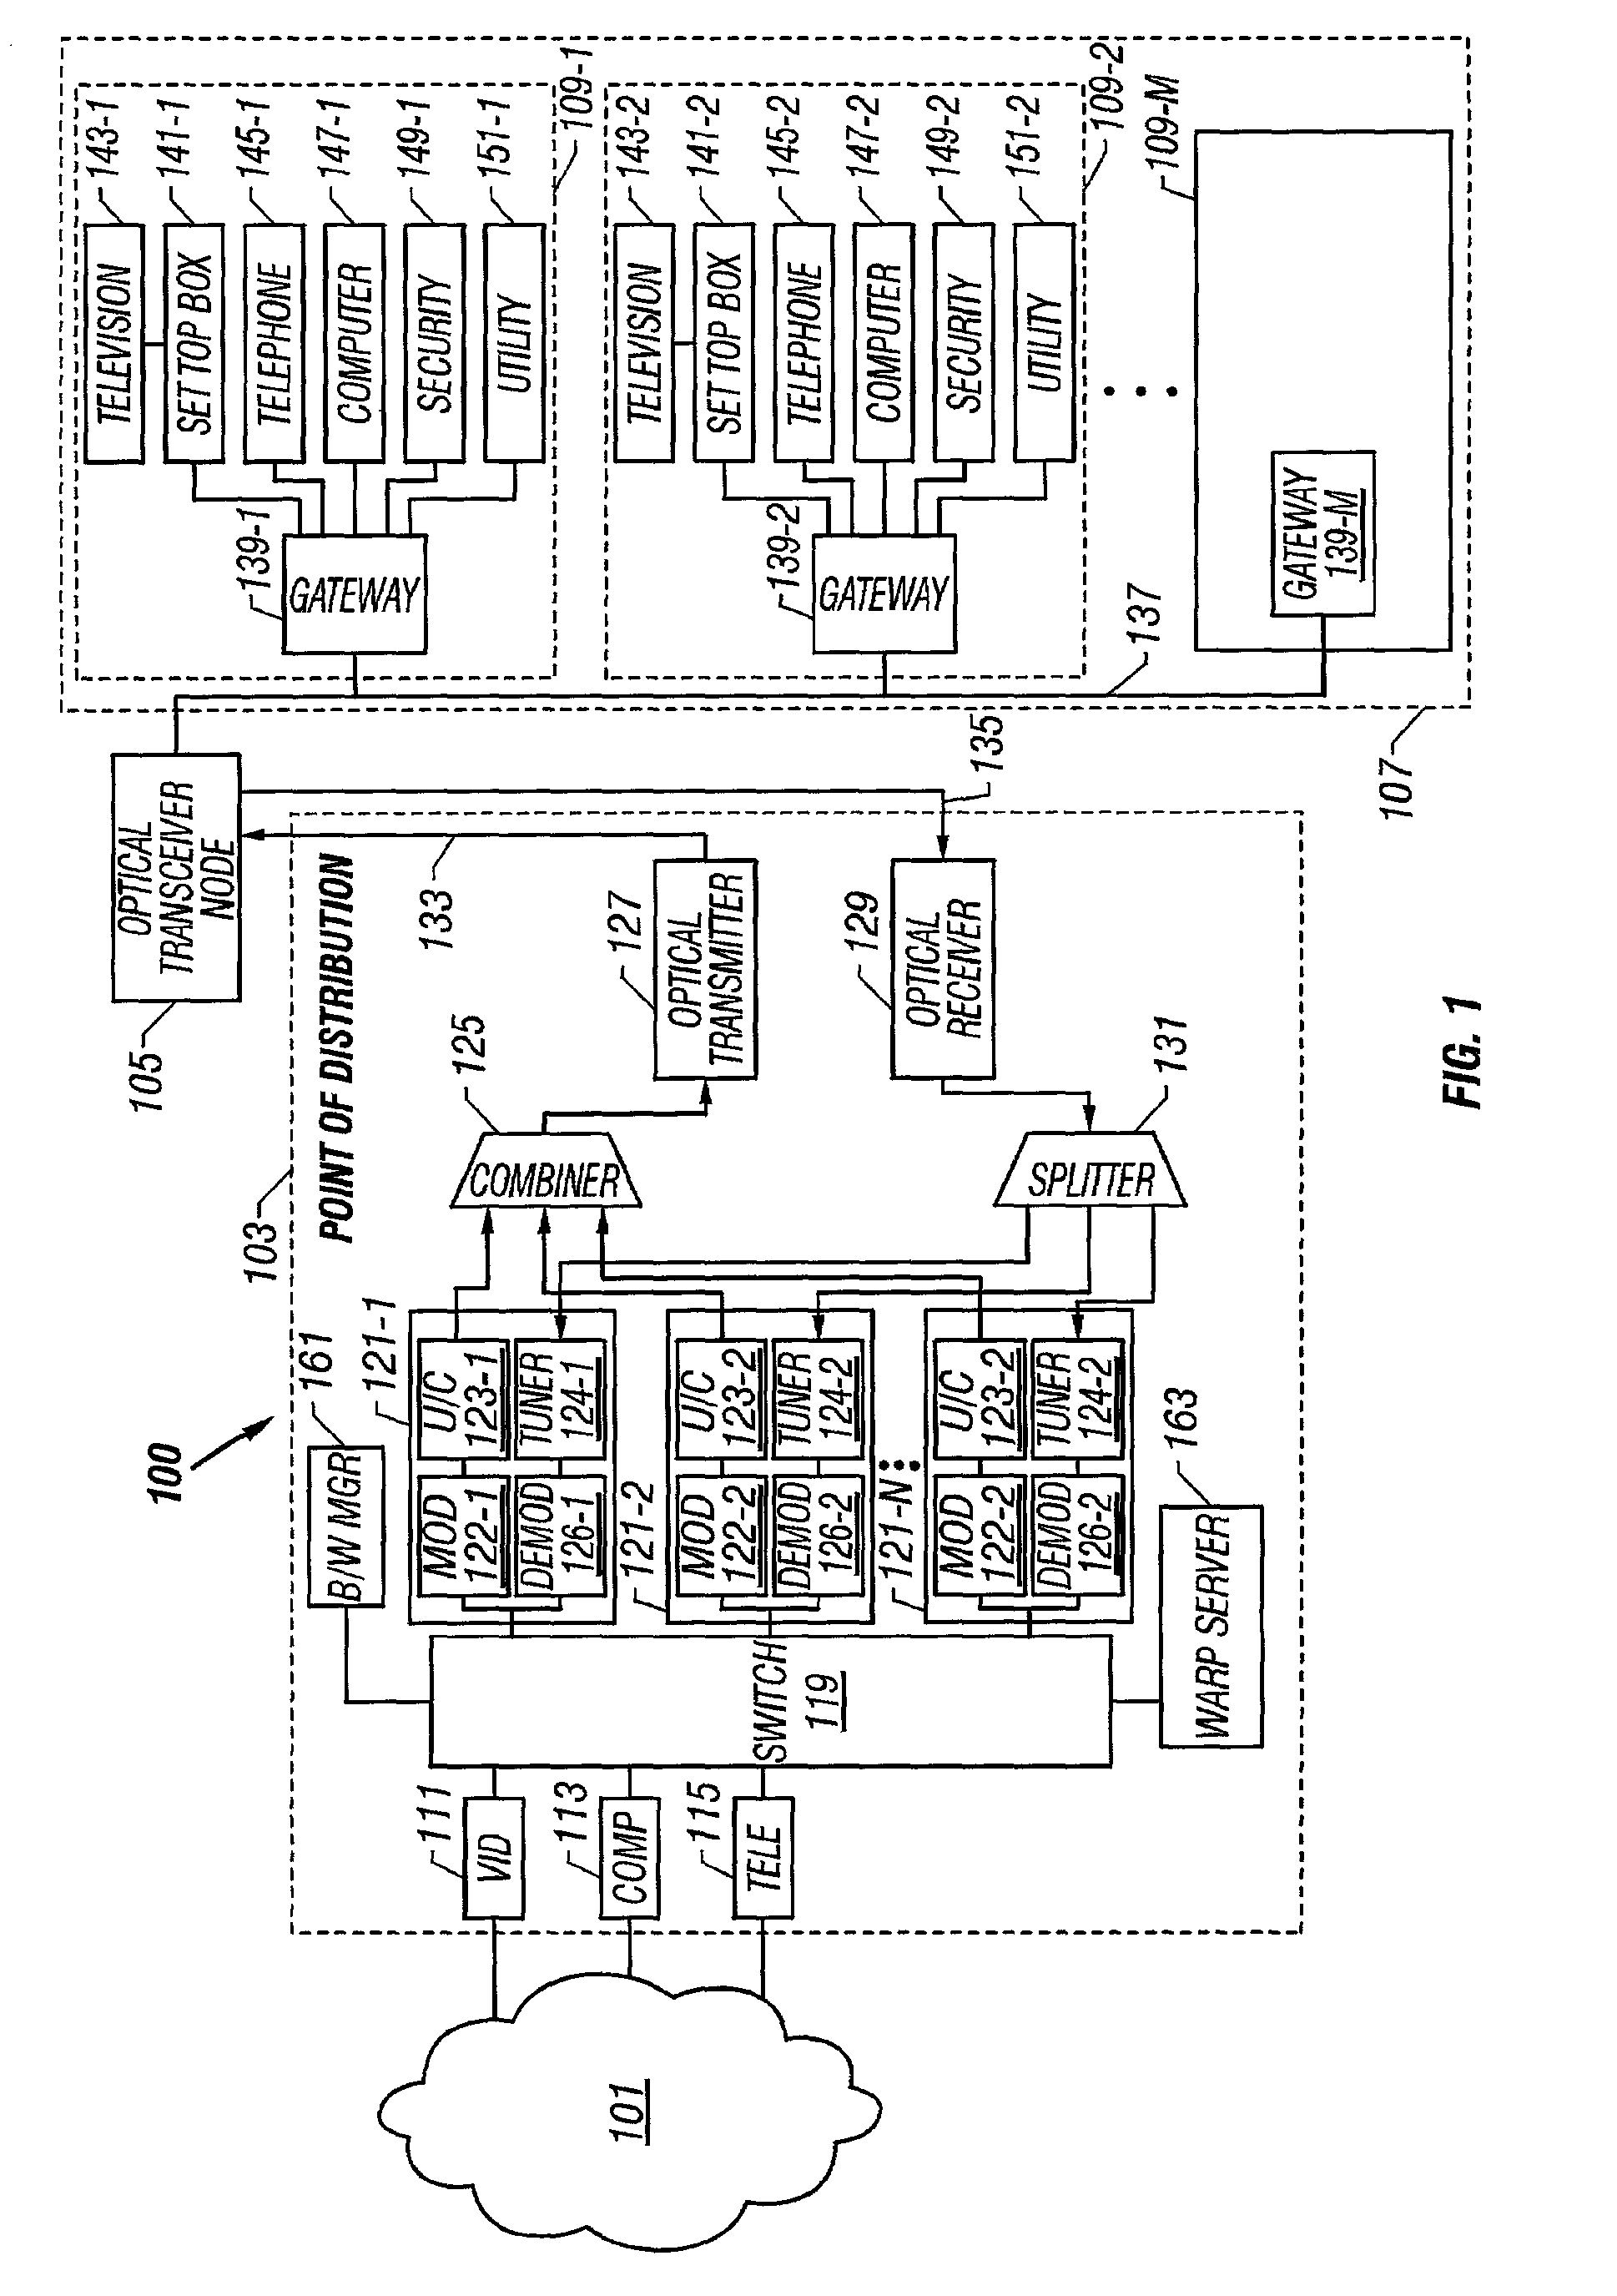 Method and system for communicating information between a point of distribution and a plurality of subscriber destinations via a hybrid fiber coax delivery plant